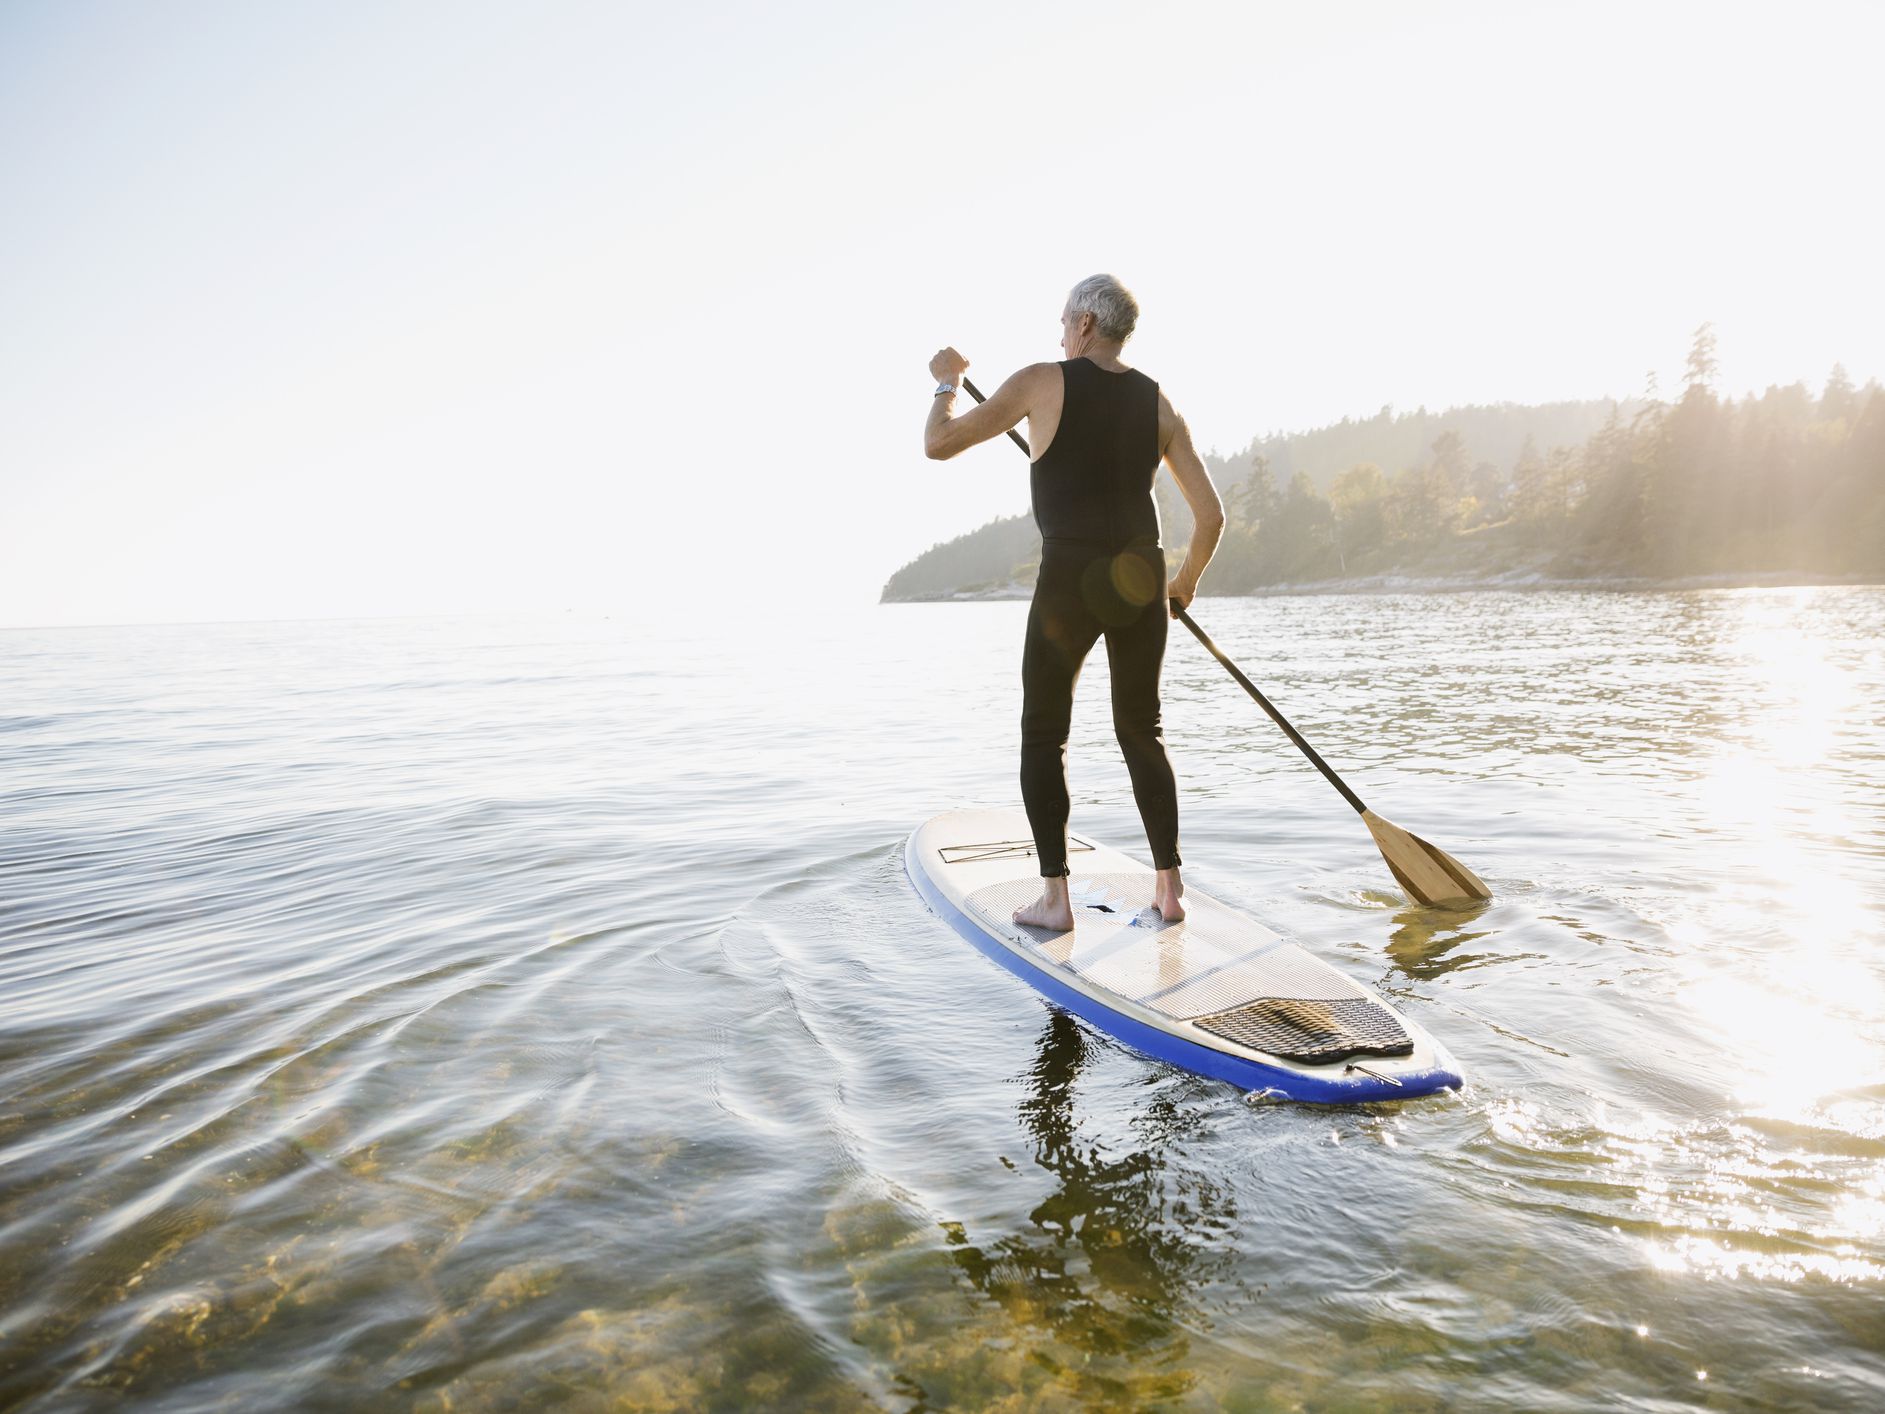 Introducing a New Trend – Stand-Up Paddle Boarding